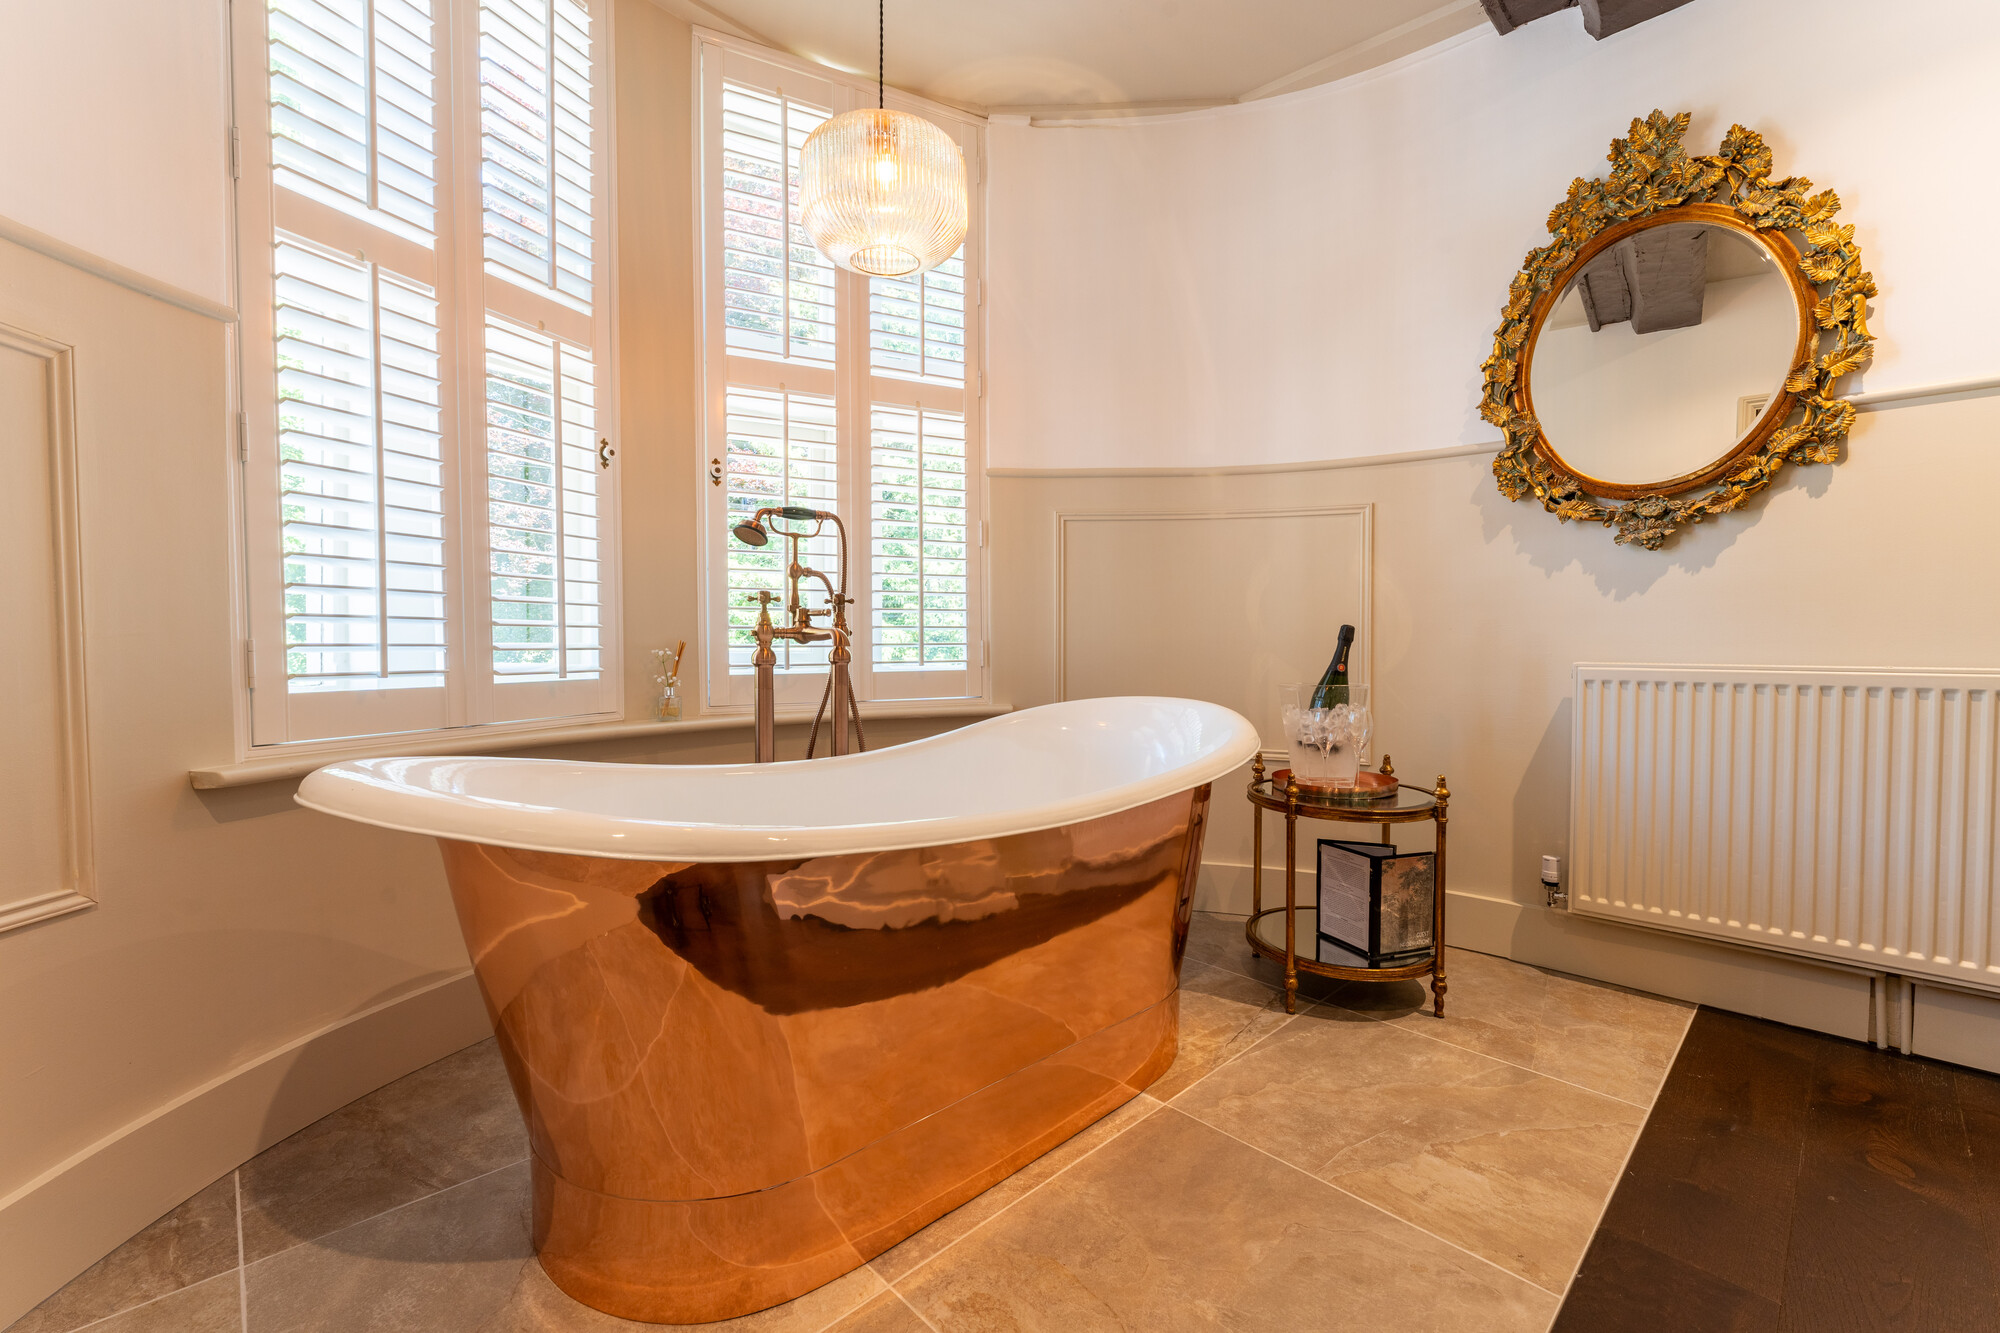 A copper rolltop bath features in the Taittinger Suite